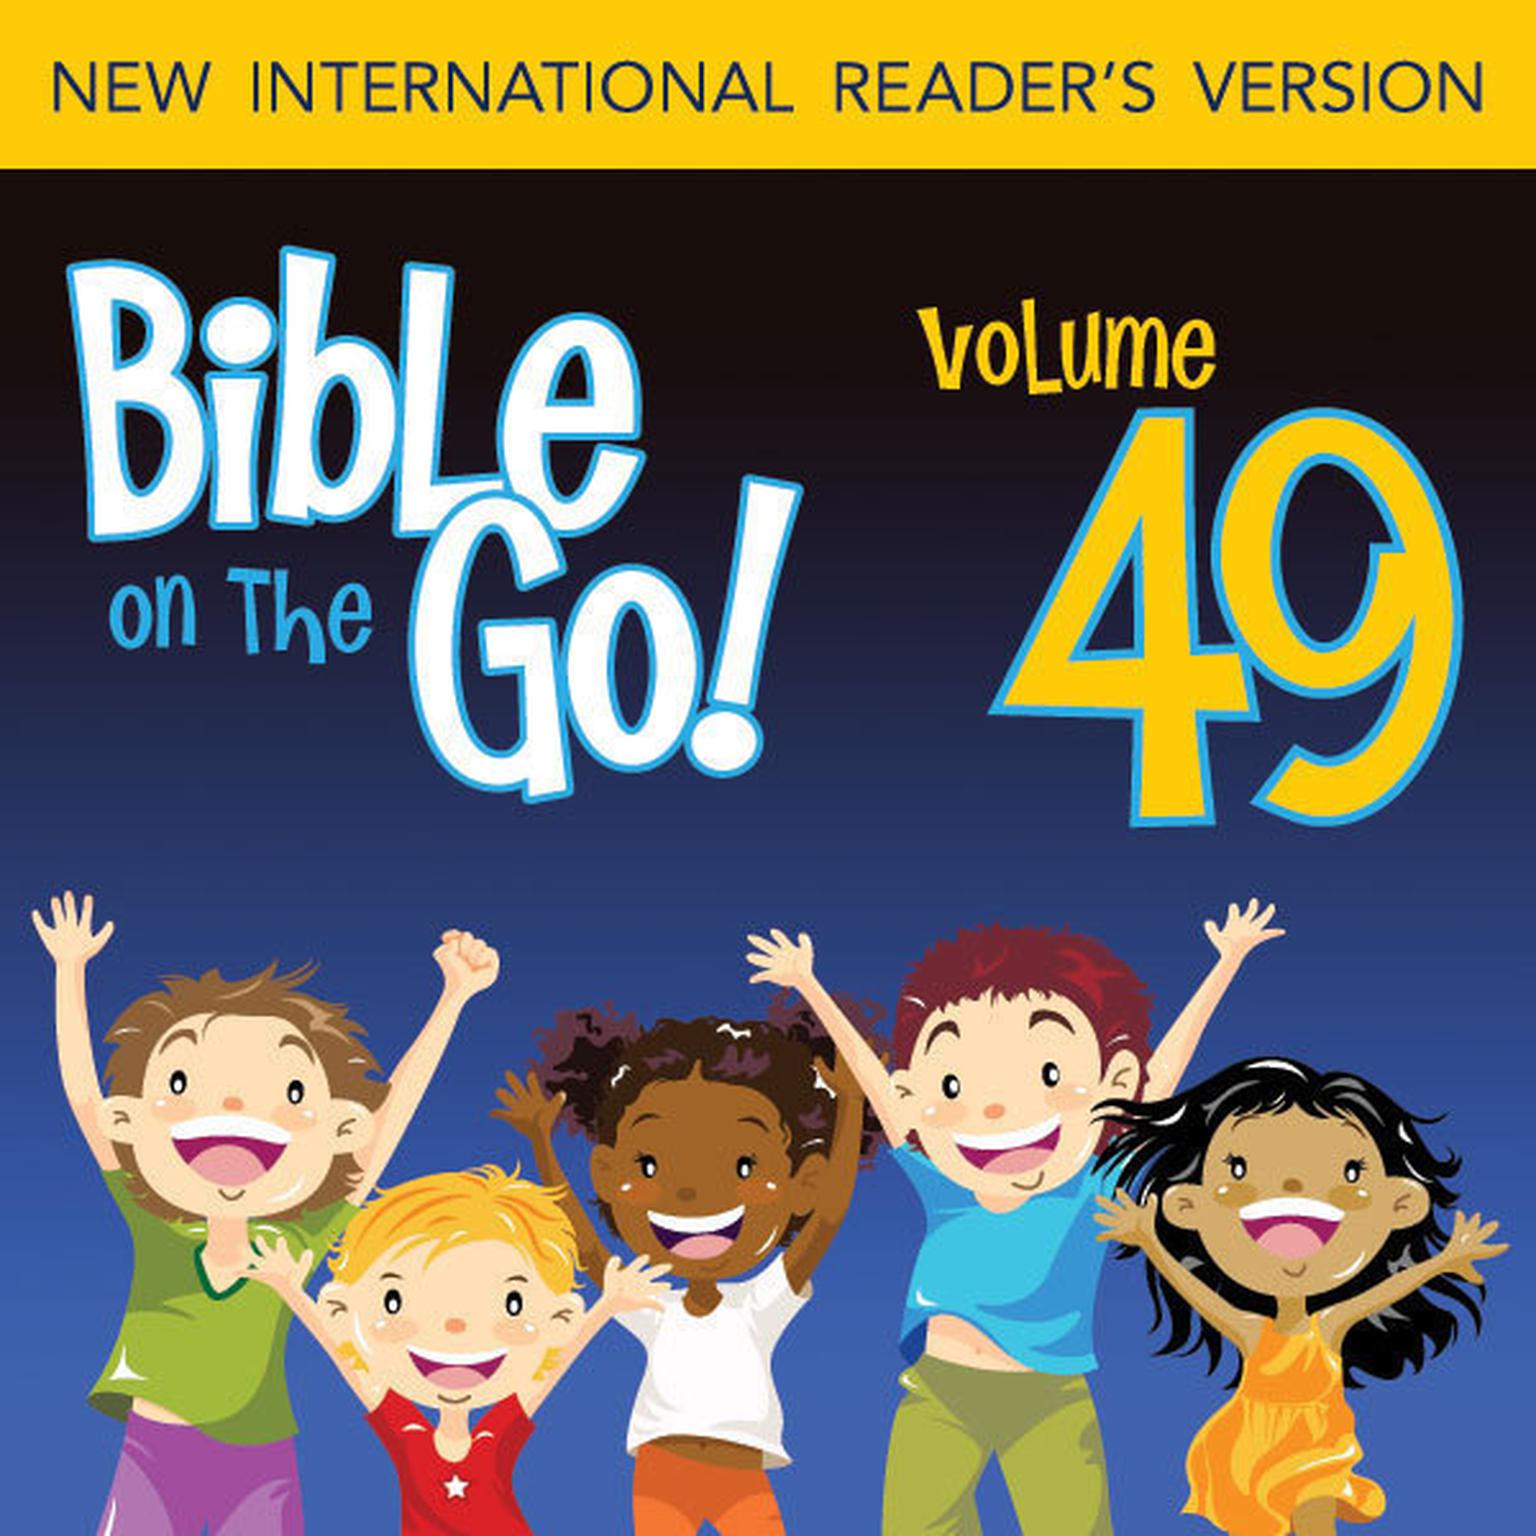 Bible on the Go Audio Bible - New International Readers Version, NIrV: Vol. 49 Letters of John; Jude; Revelation (1 John 3; 3 John; Jude; Revelation 1-2, 4, 19) Audiobook, by Zondervan